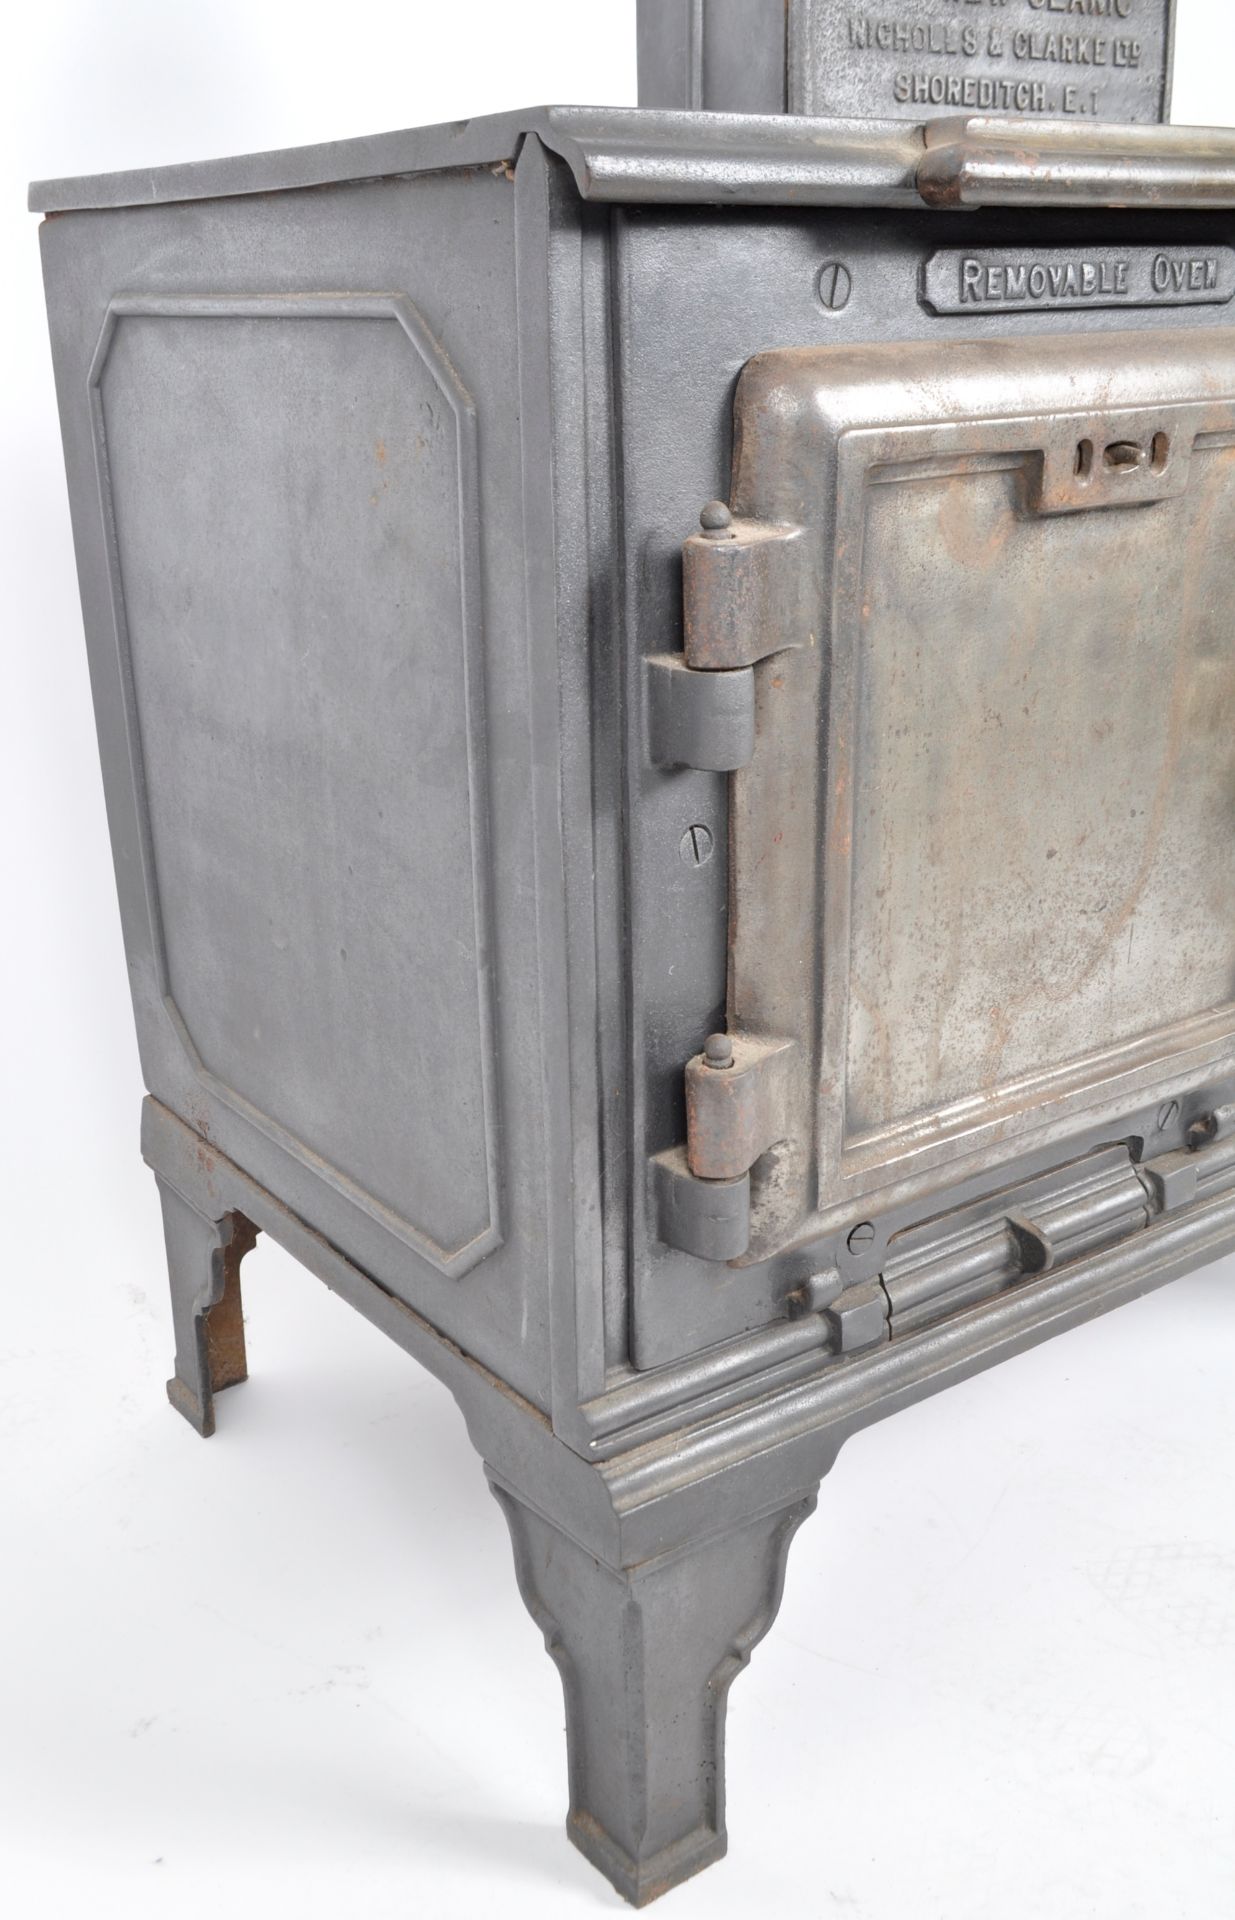 19TH CENTURY VICTORIAN CAST IRON OVEN STOVE - Image 6 of 6